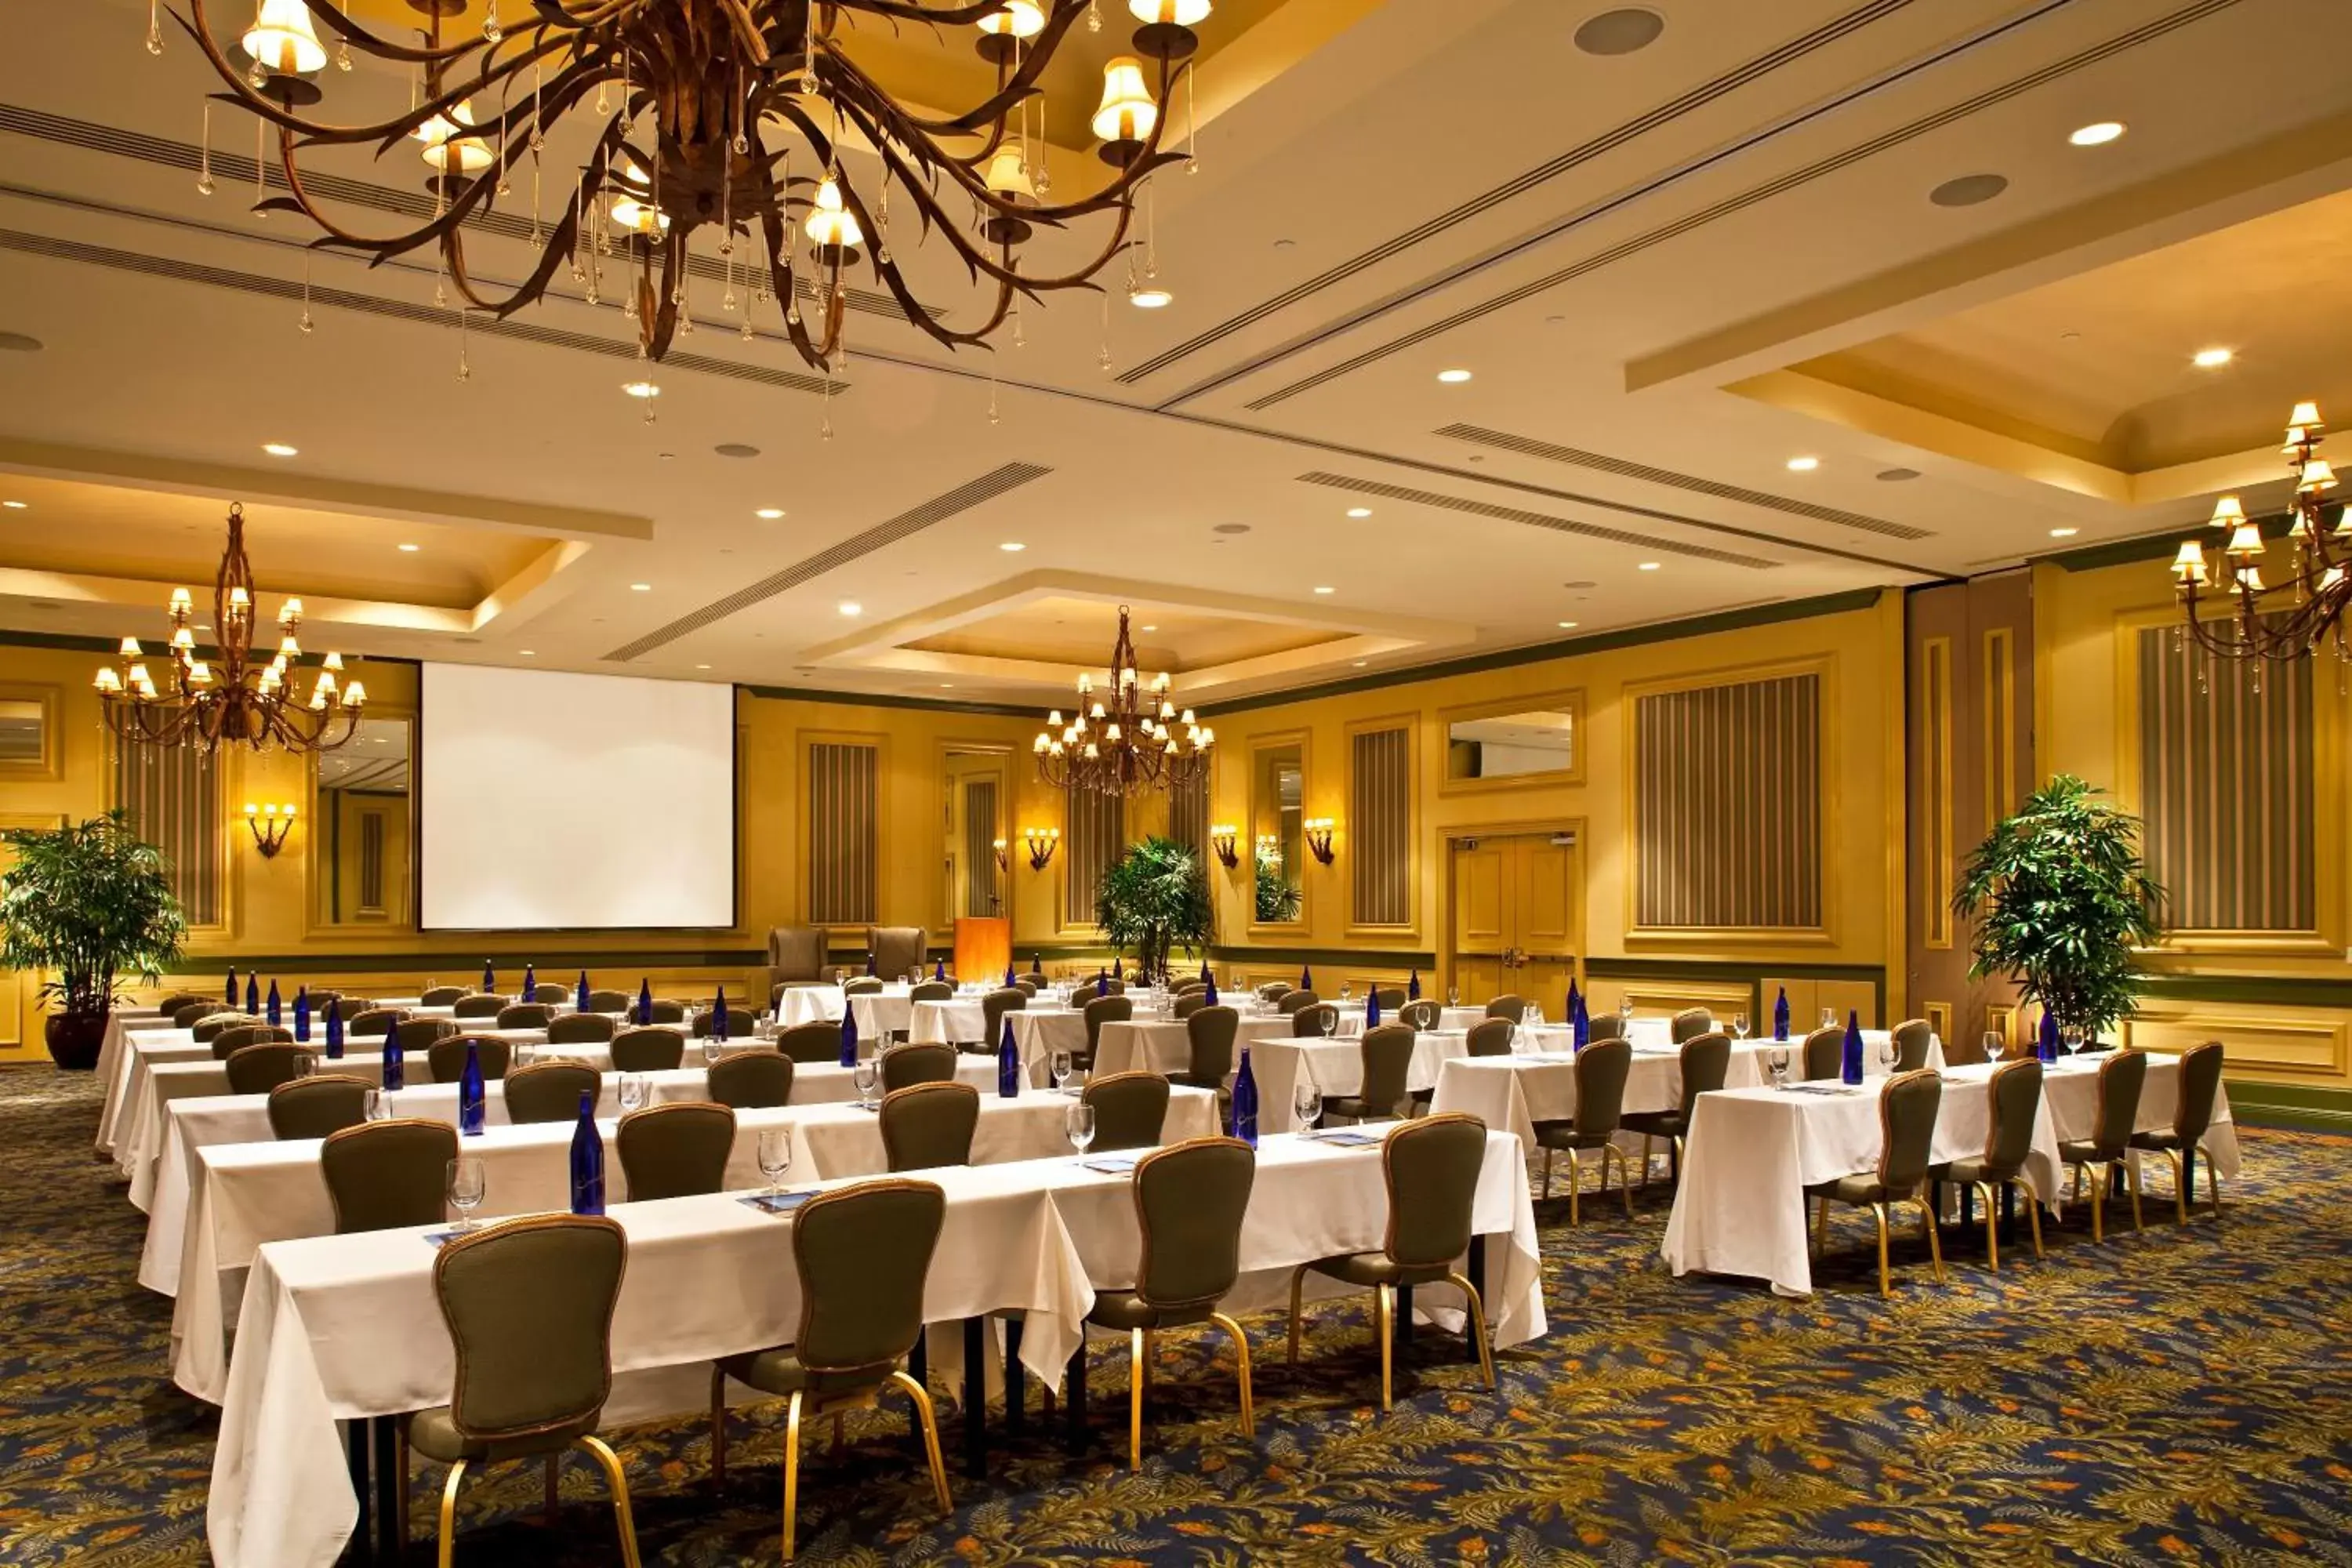 Meeting/conference room, Banquet Facilities in The Shores Resort & Spa